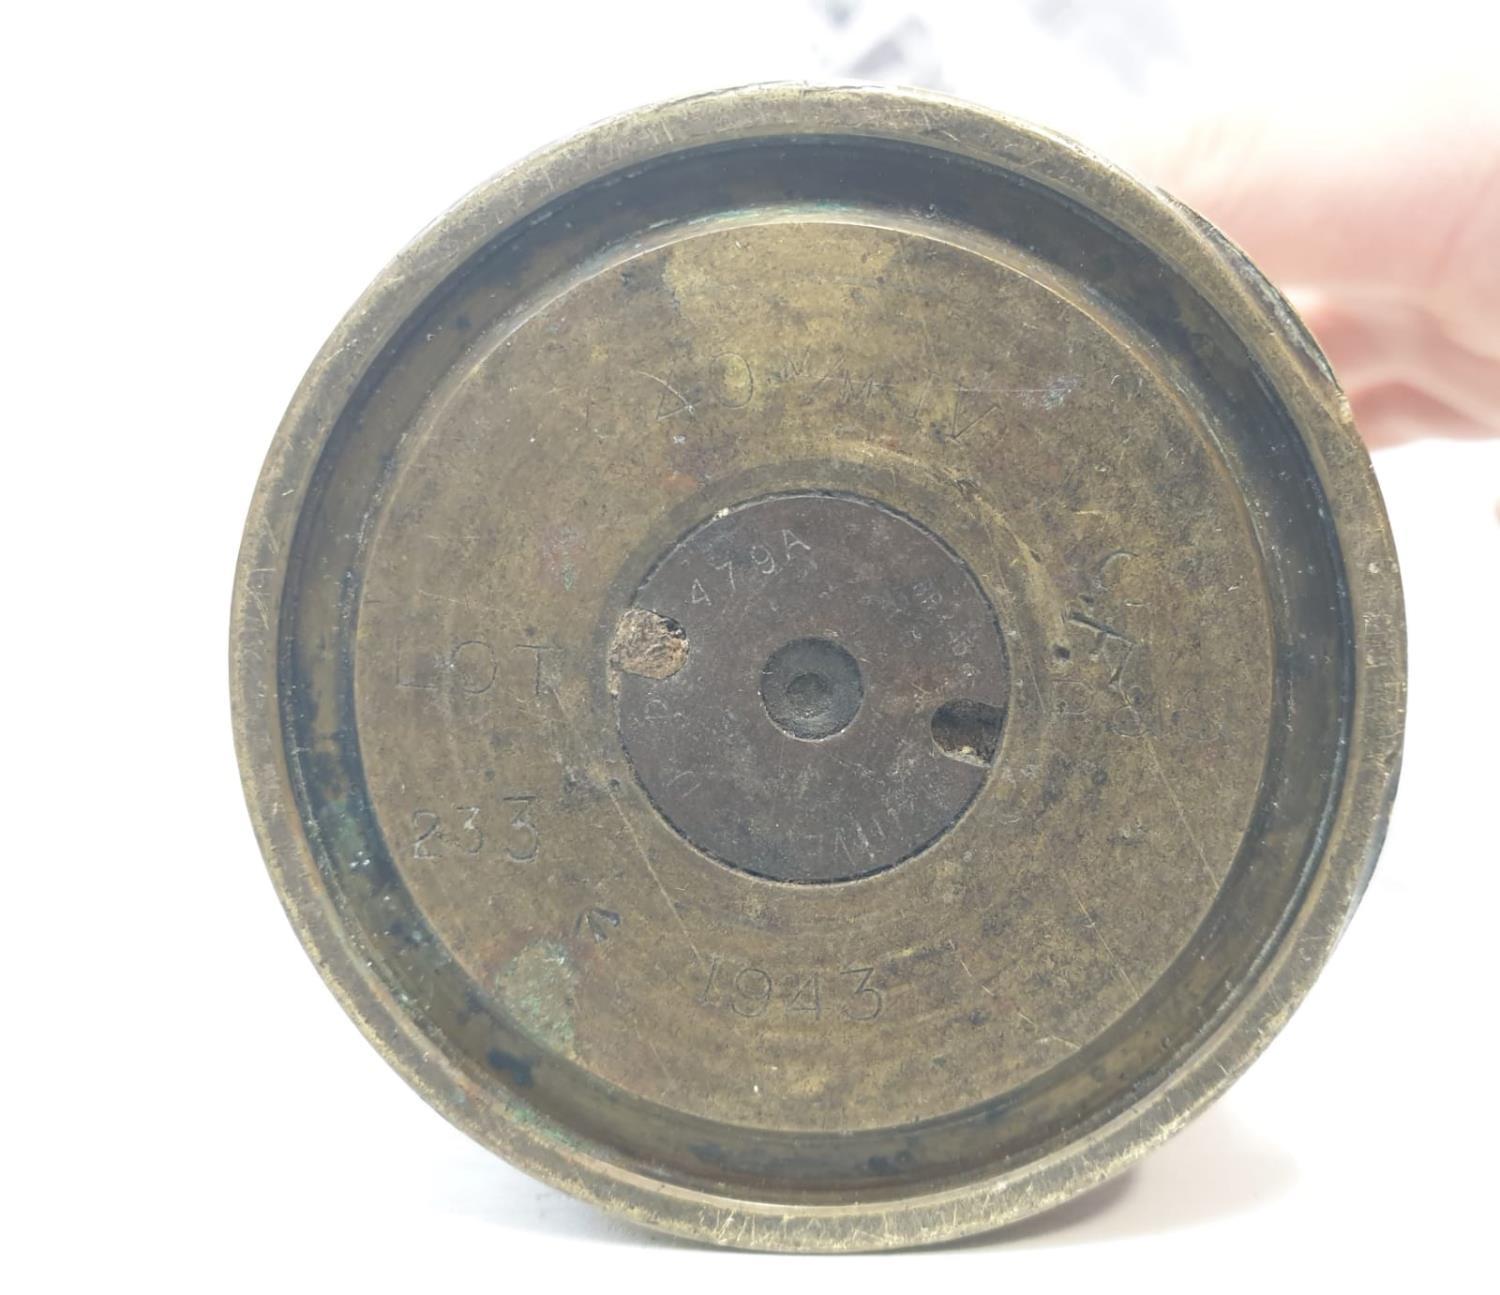 INERT WW2 Bofors Anti Aircraft Round Dated 1943. Empty Shell Case With Resin Head - Image 7 of 7